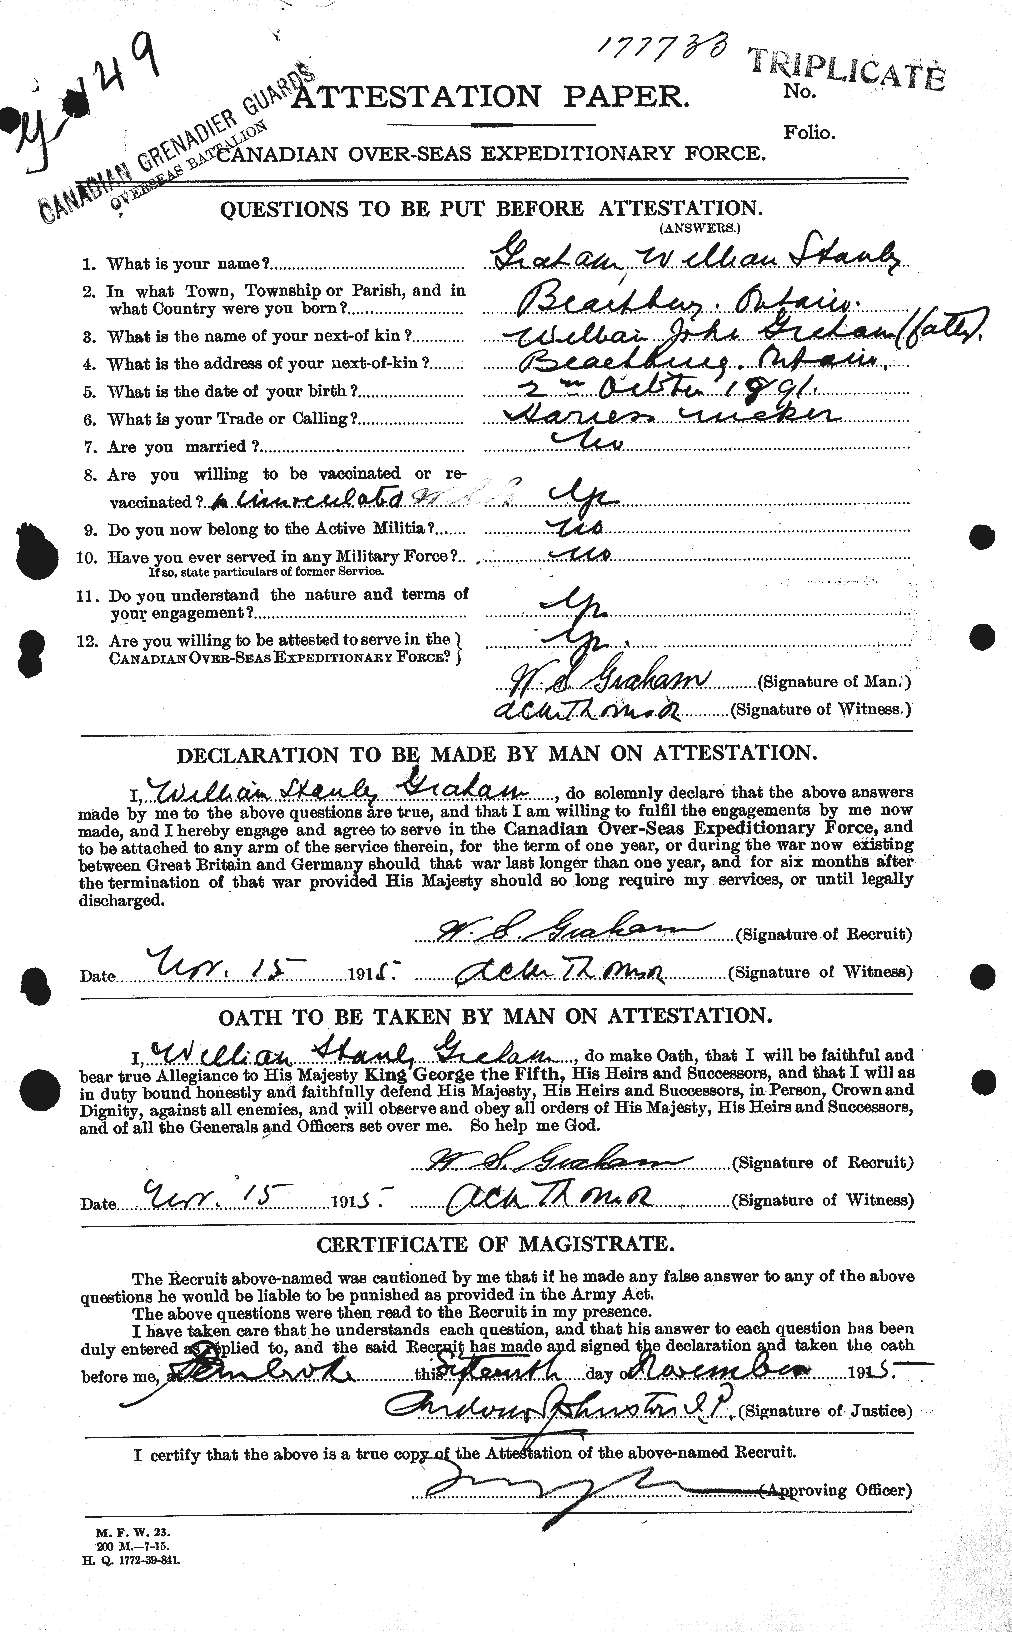 Personnel Records of the First World War - CEF 358042a